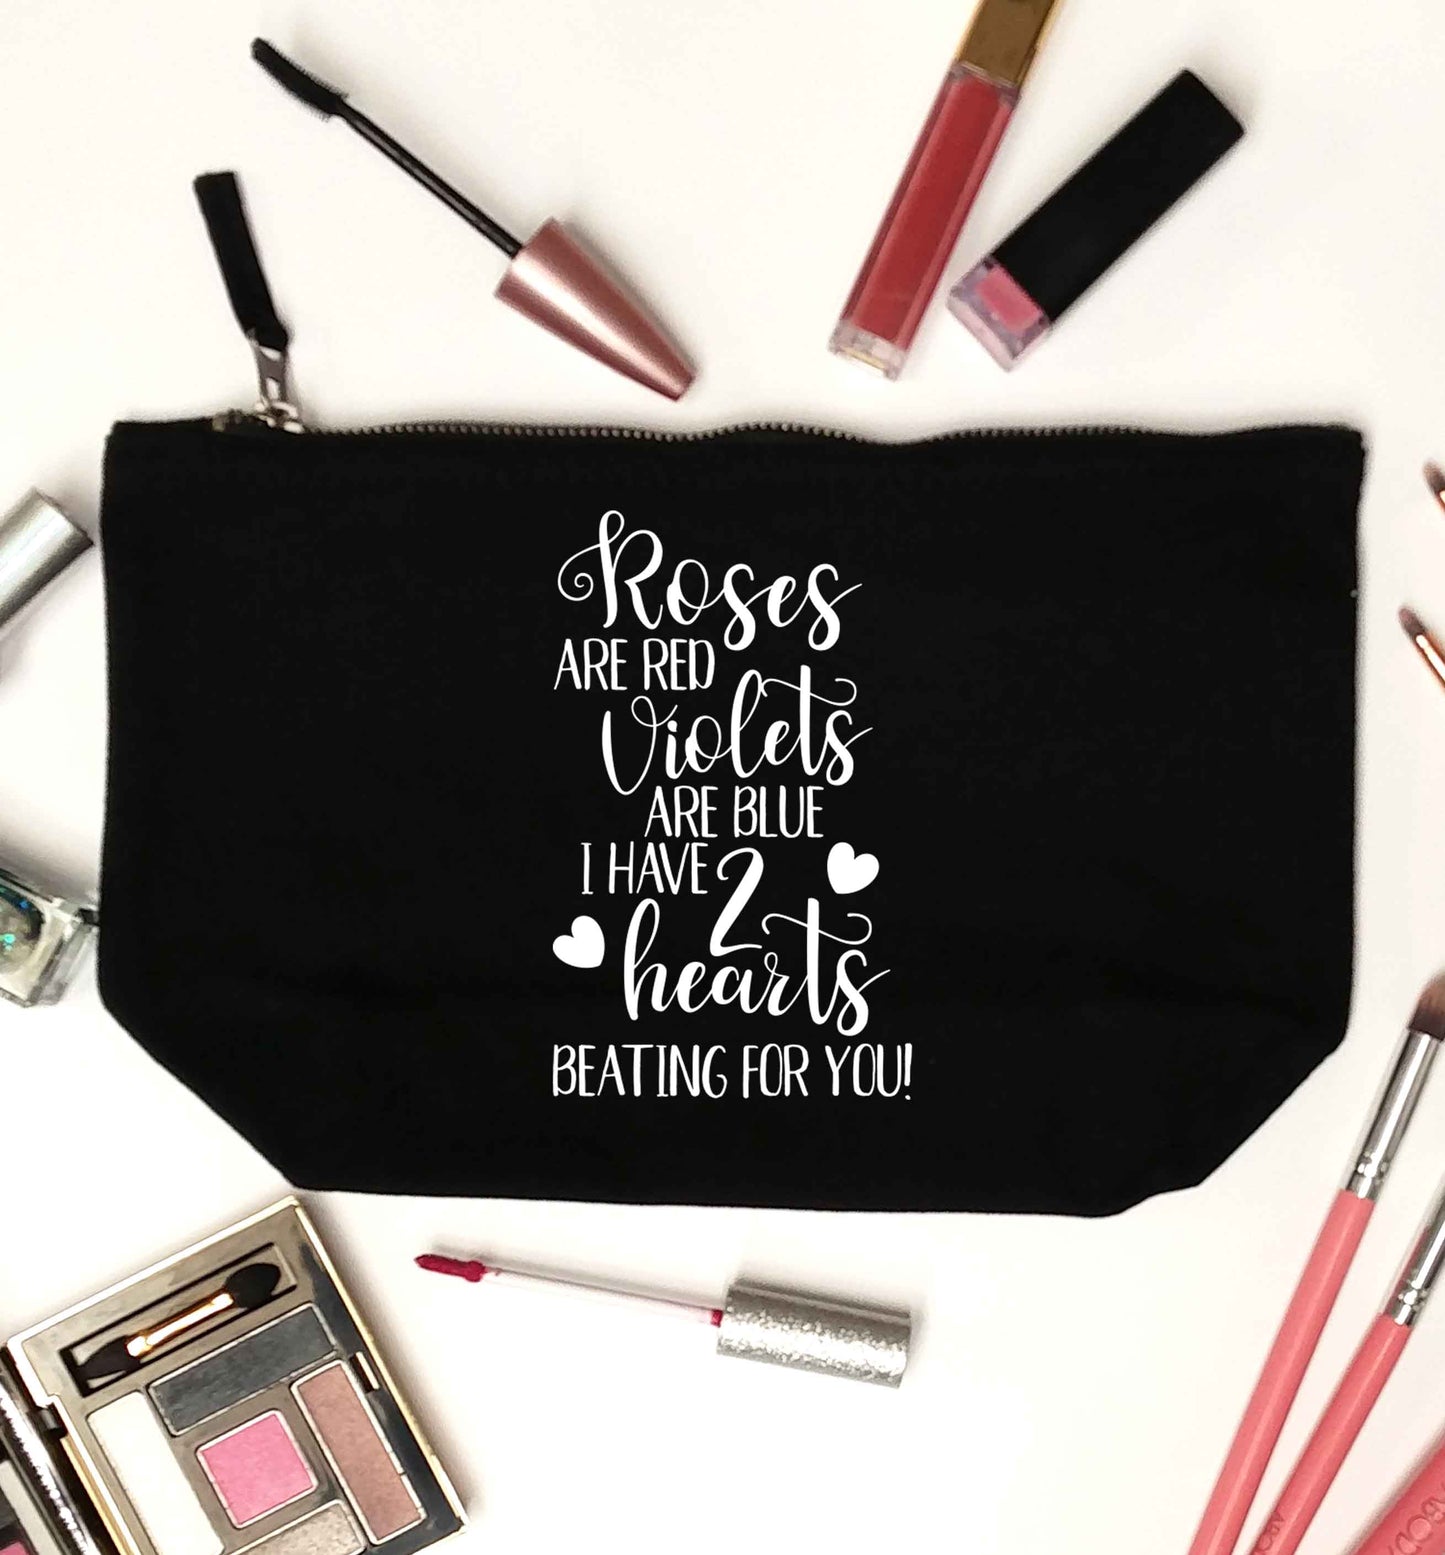 Roses are red violets are blue I have two hearts beating for you black makeup bag